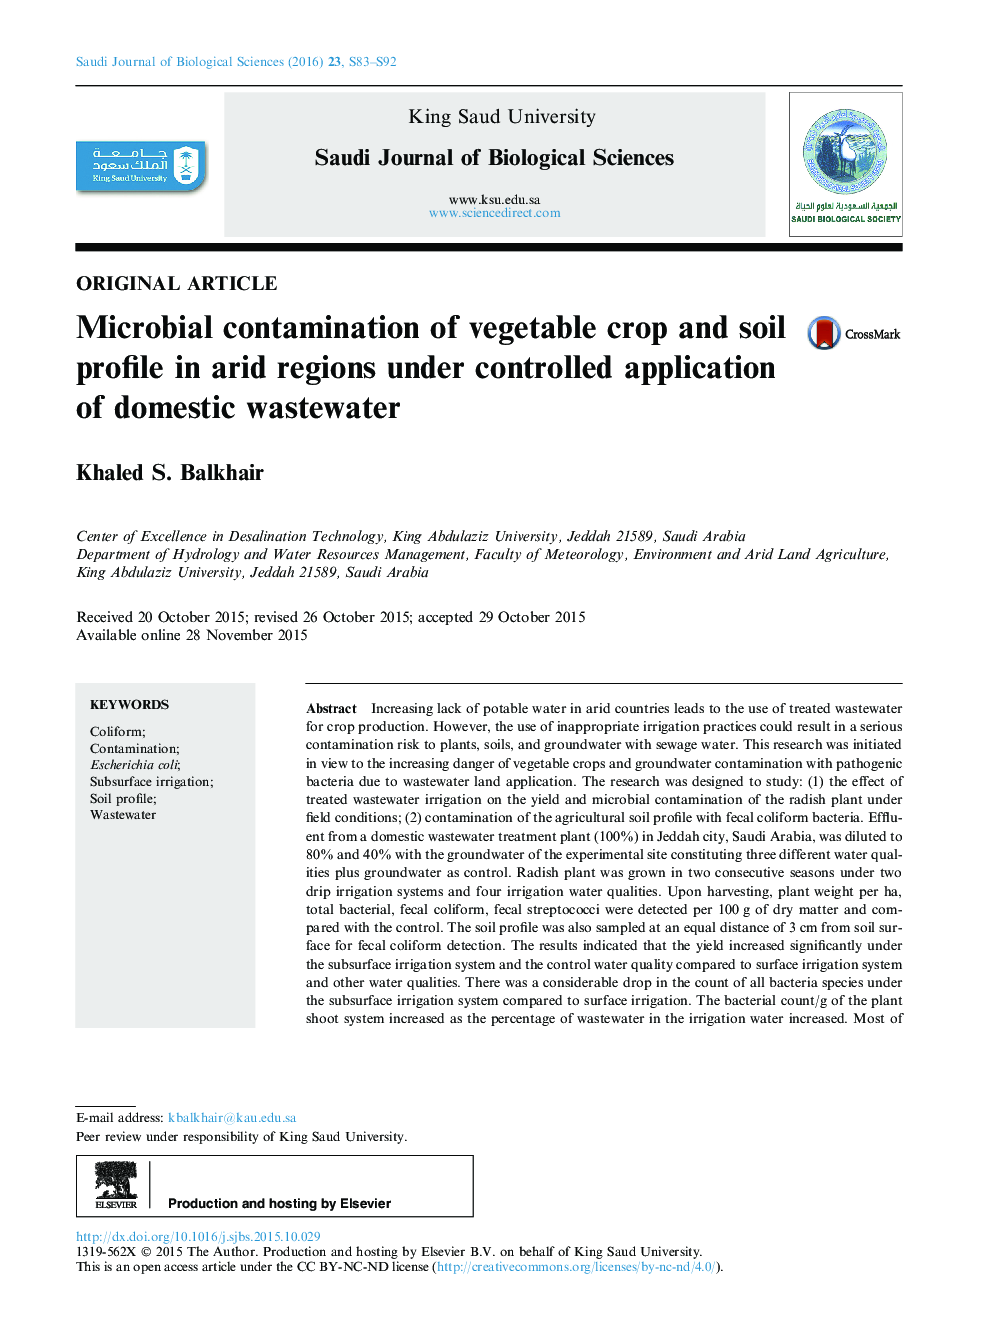 Microbial contamination of vegetable crop and soil profile in arid regions under controlled application of domestic wastewater 